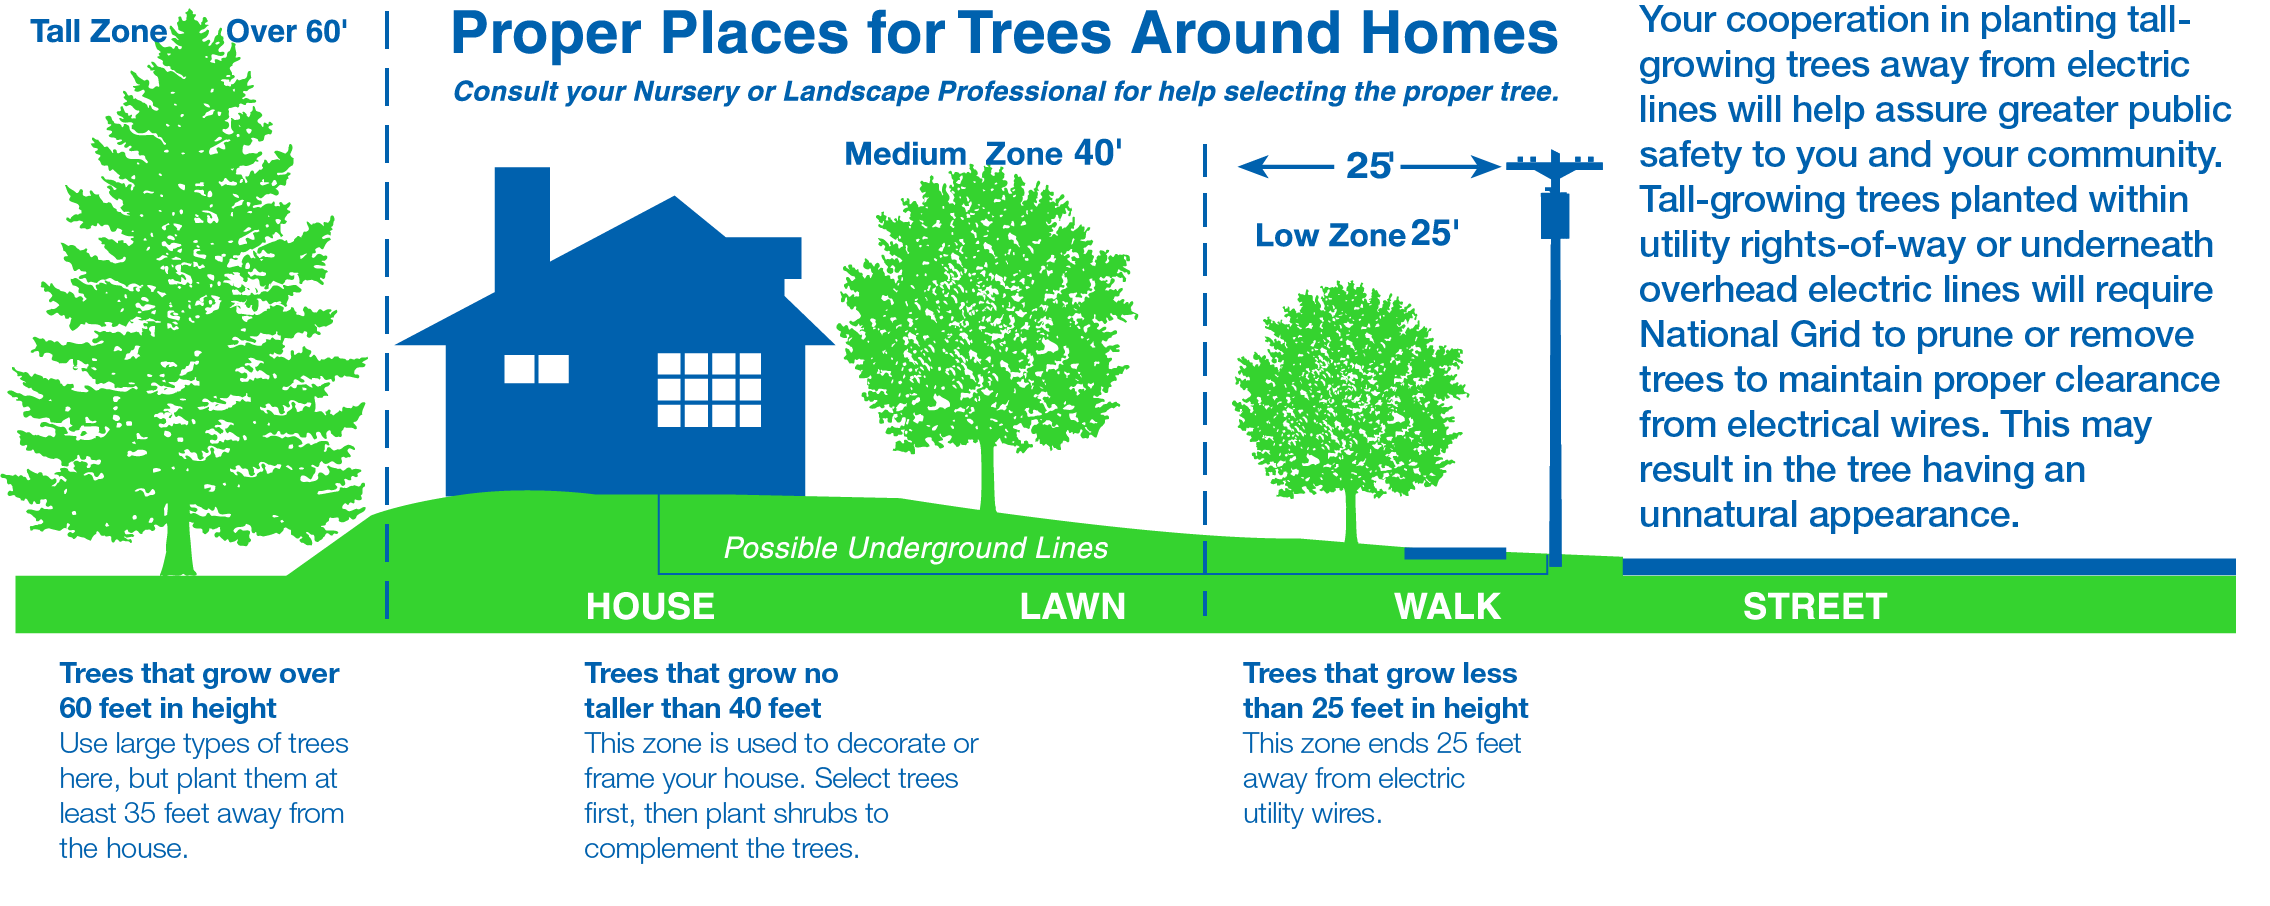 Proper Places for Trees Around Homes